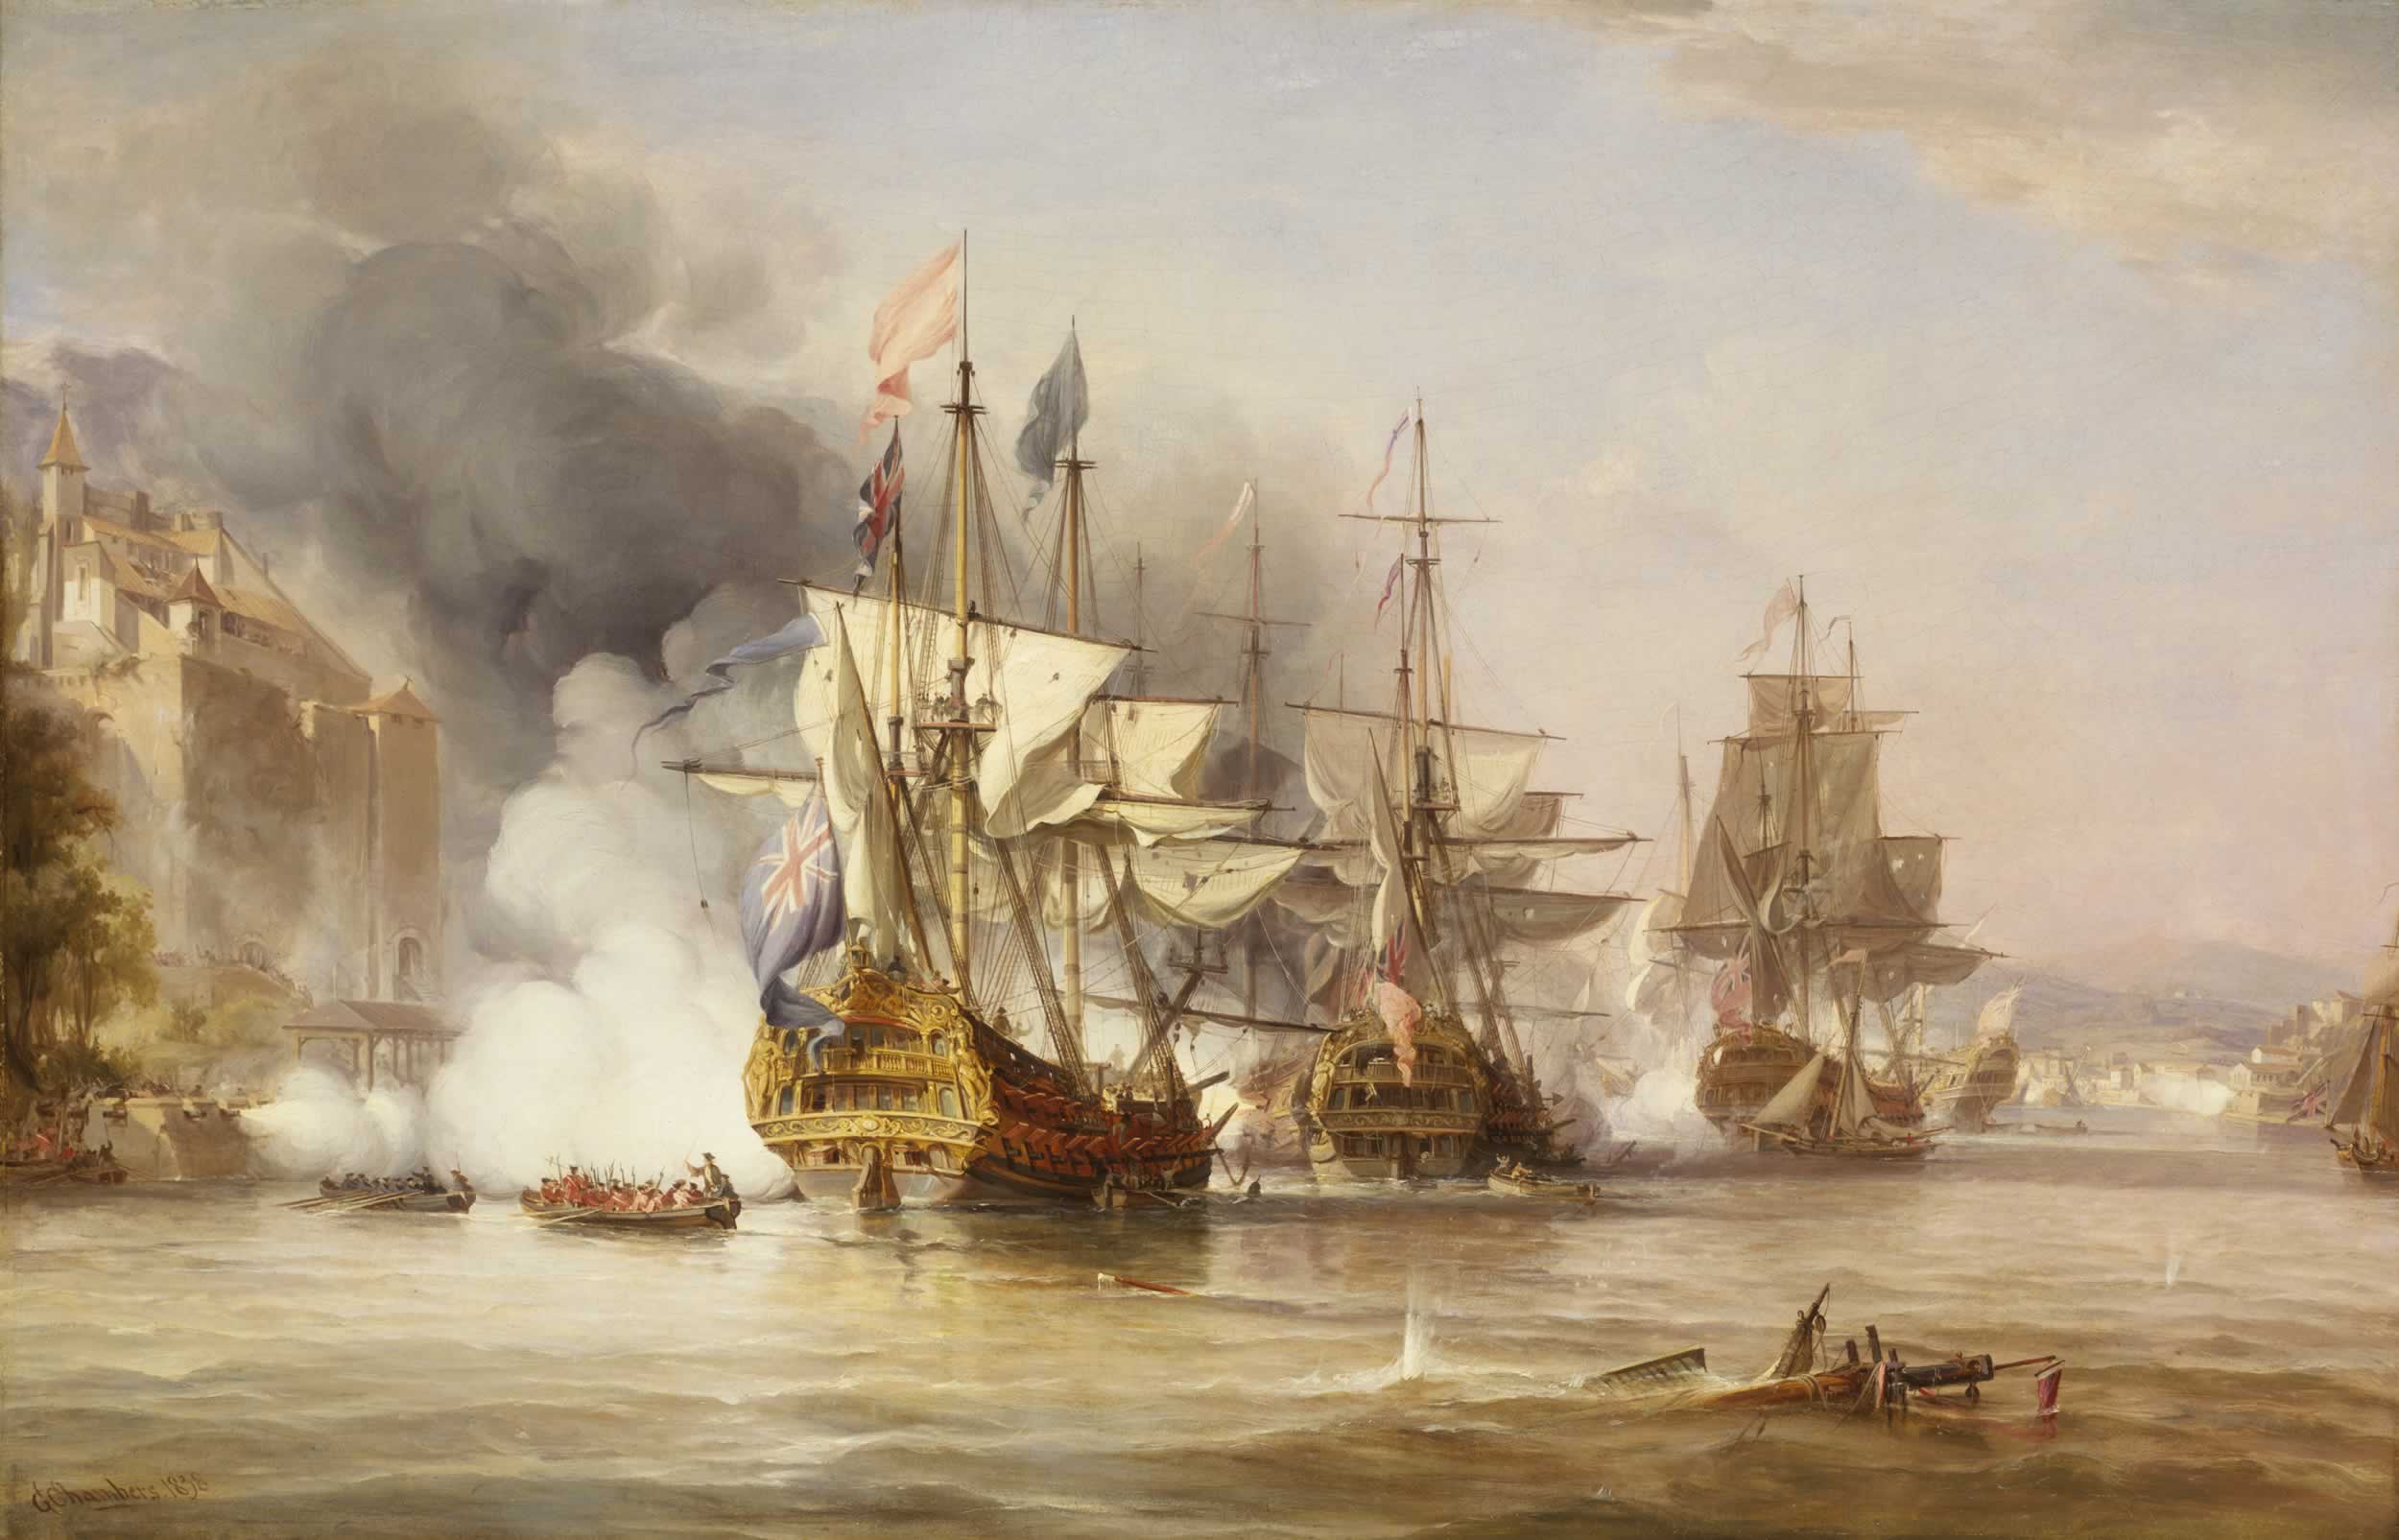 The-Capture-of-Puerto-Bello-21-November-1739-by-George-Chambers-Senior-1836